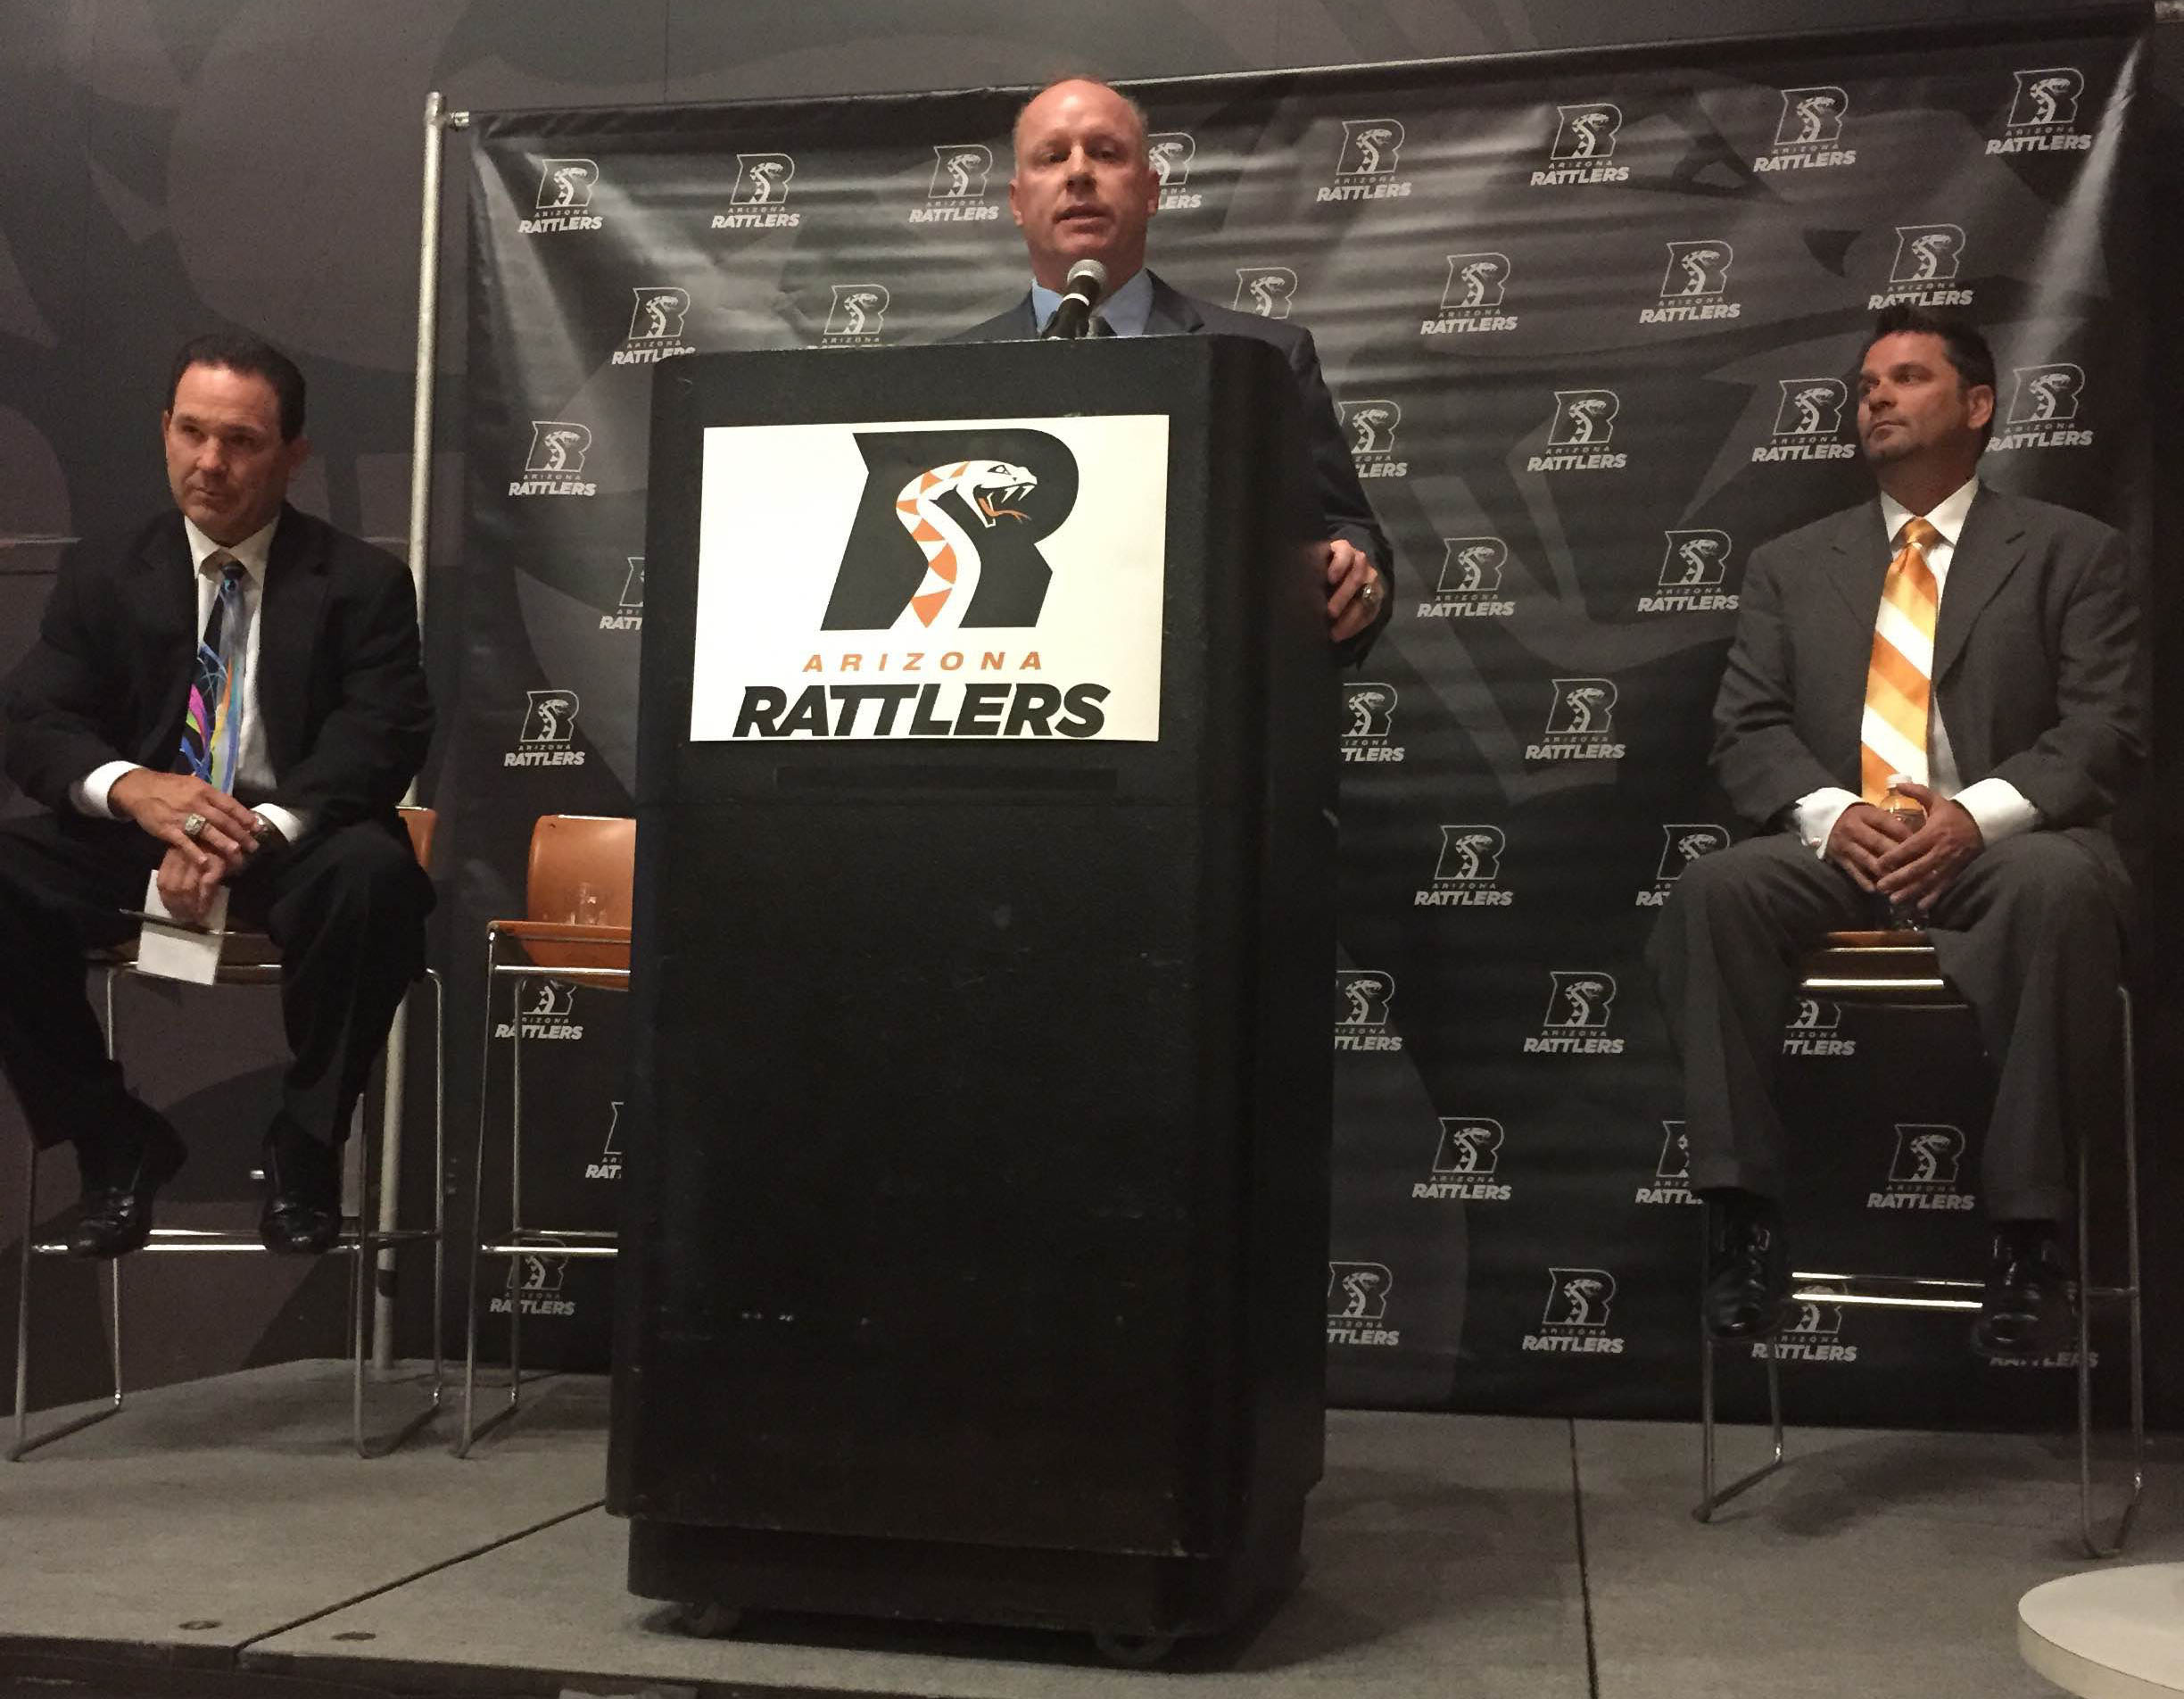 Last season, the Arizona Rattlers posted their best home attendance numbers since 2010 en route to their third consecutive ArenaBowl championship. The team begins its title defense on Saturday with an eye on continuing to grow its fan base.